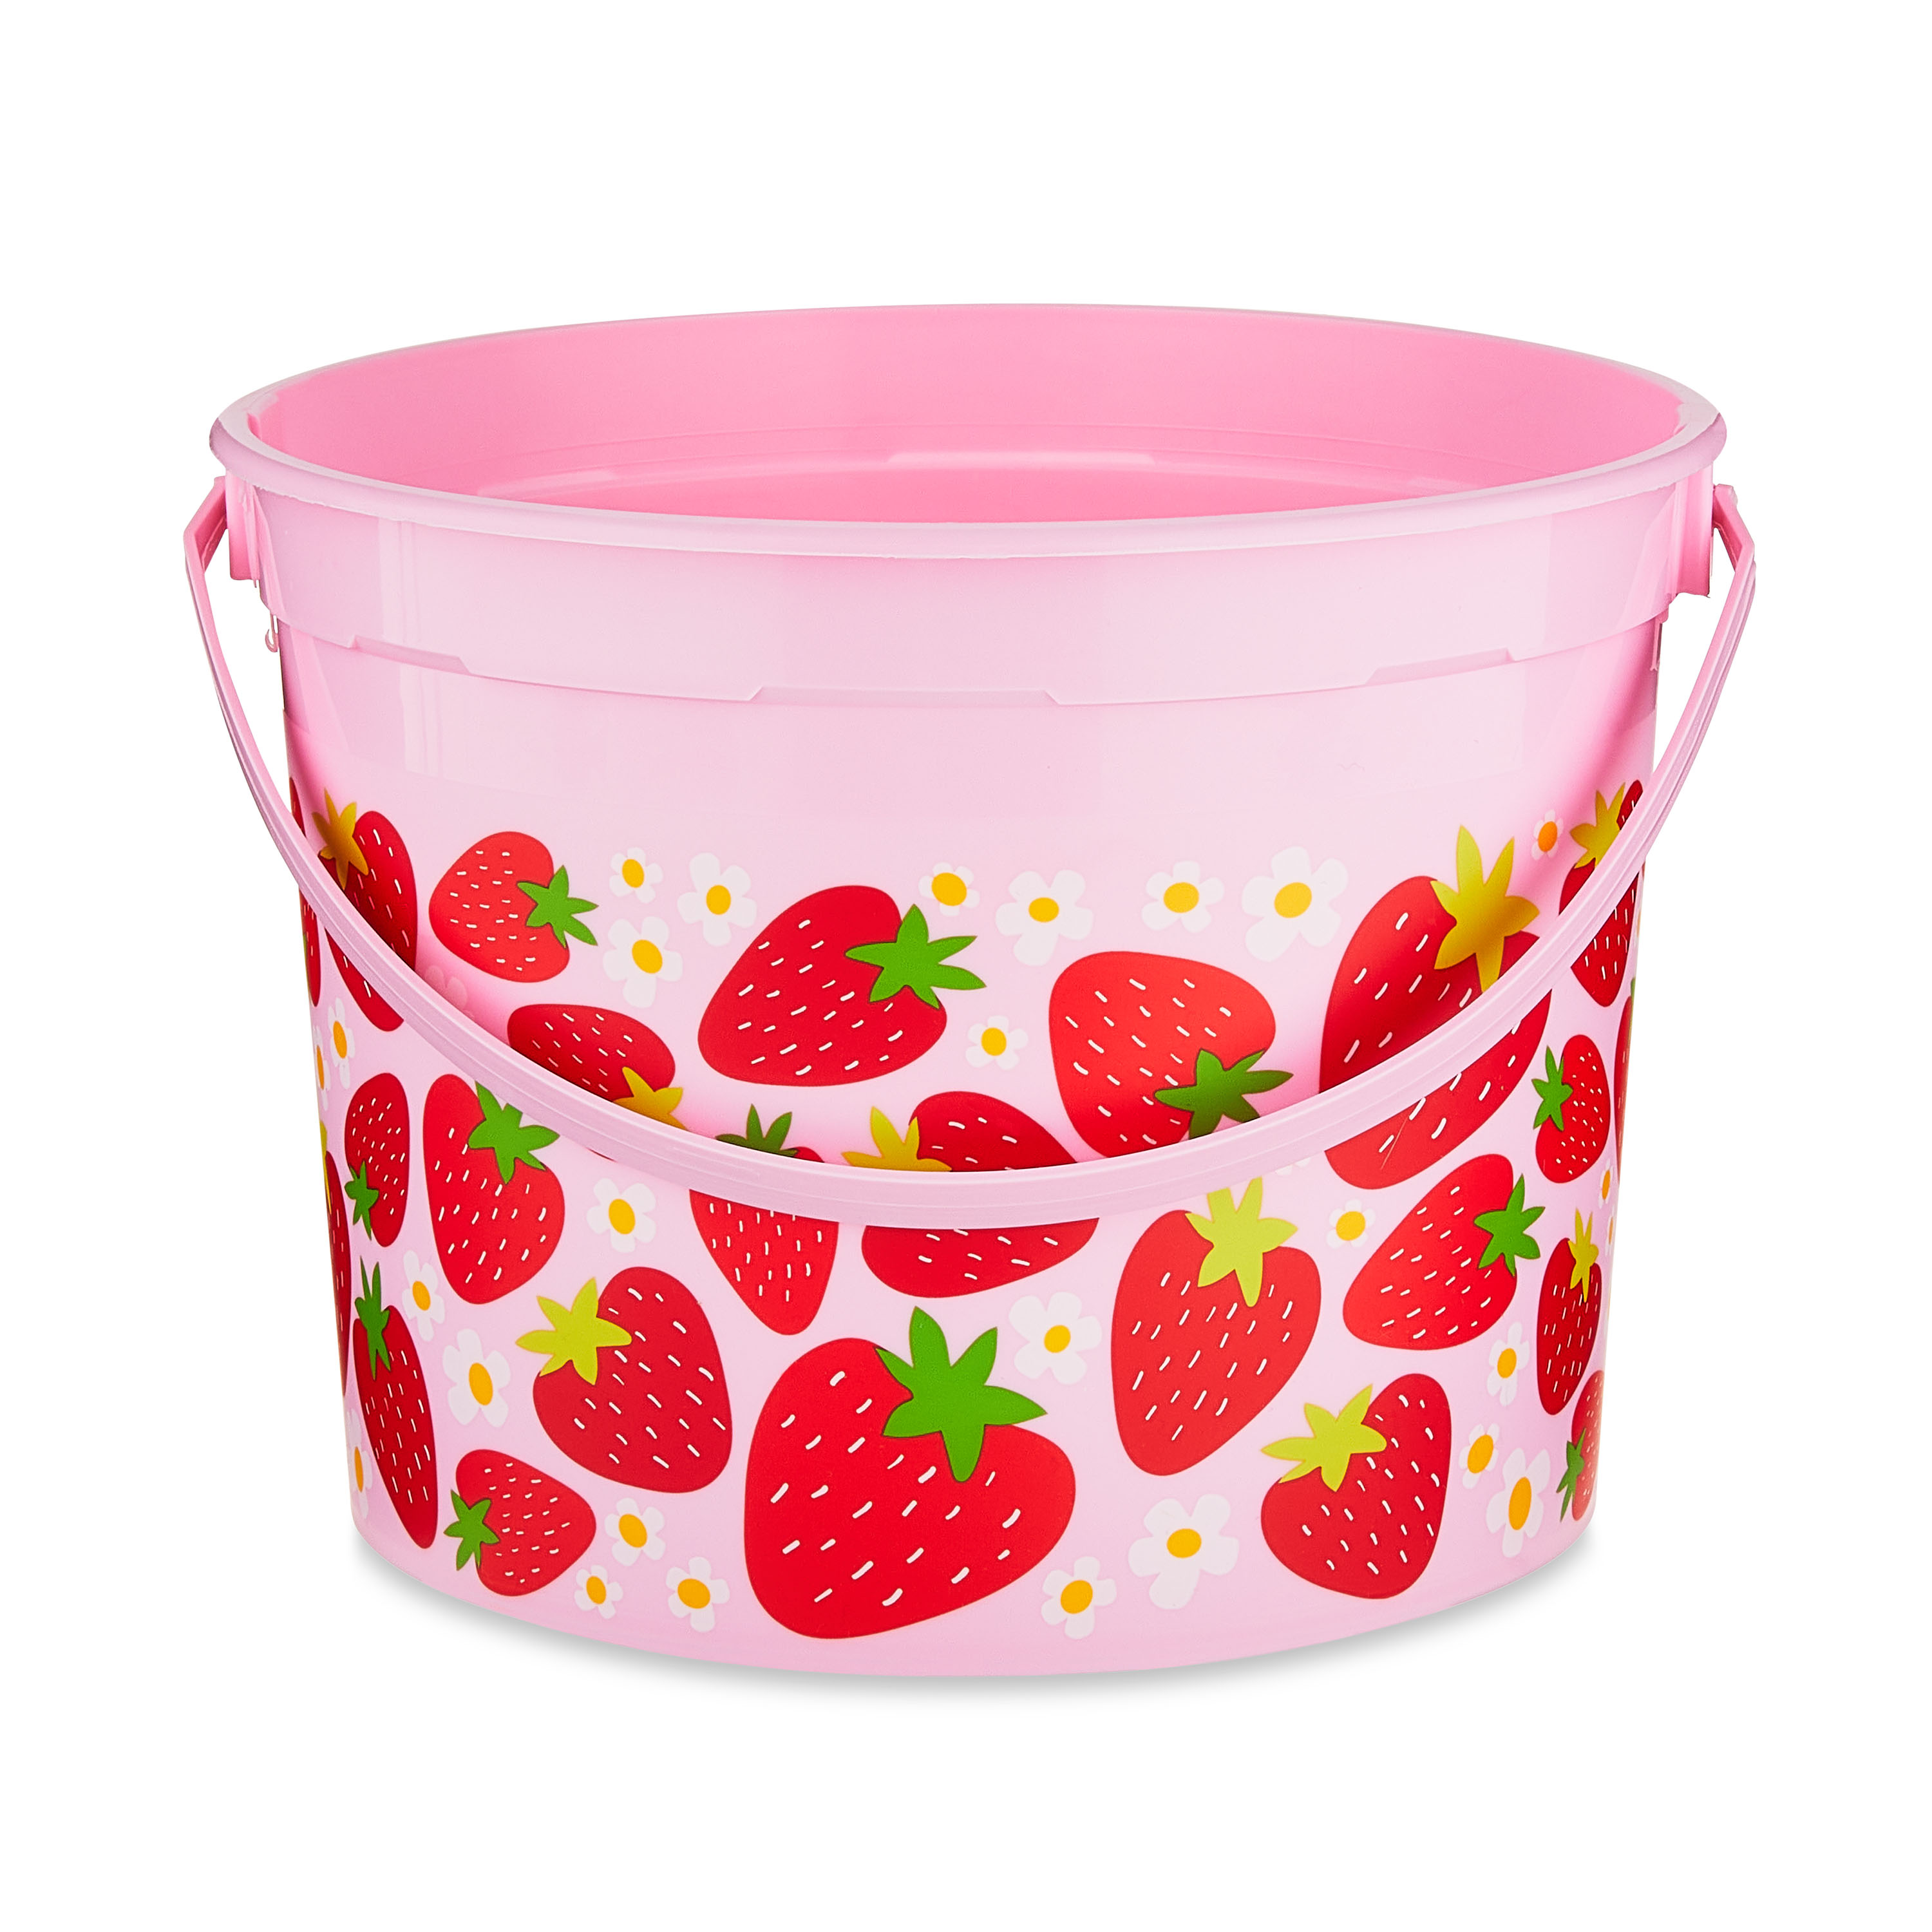 Pink & Red 5-Quart Plastic Easter Bucket, Strawberries, by Way To Celebrate - image 1 of 5